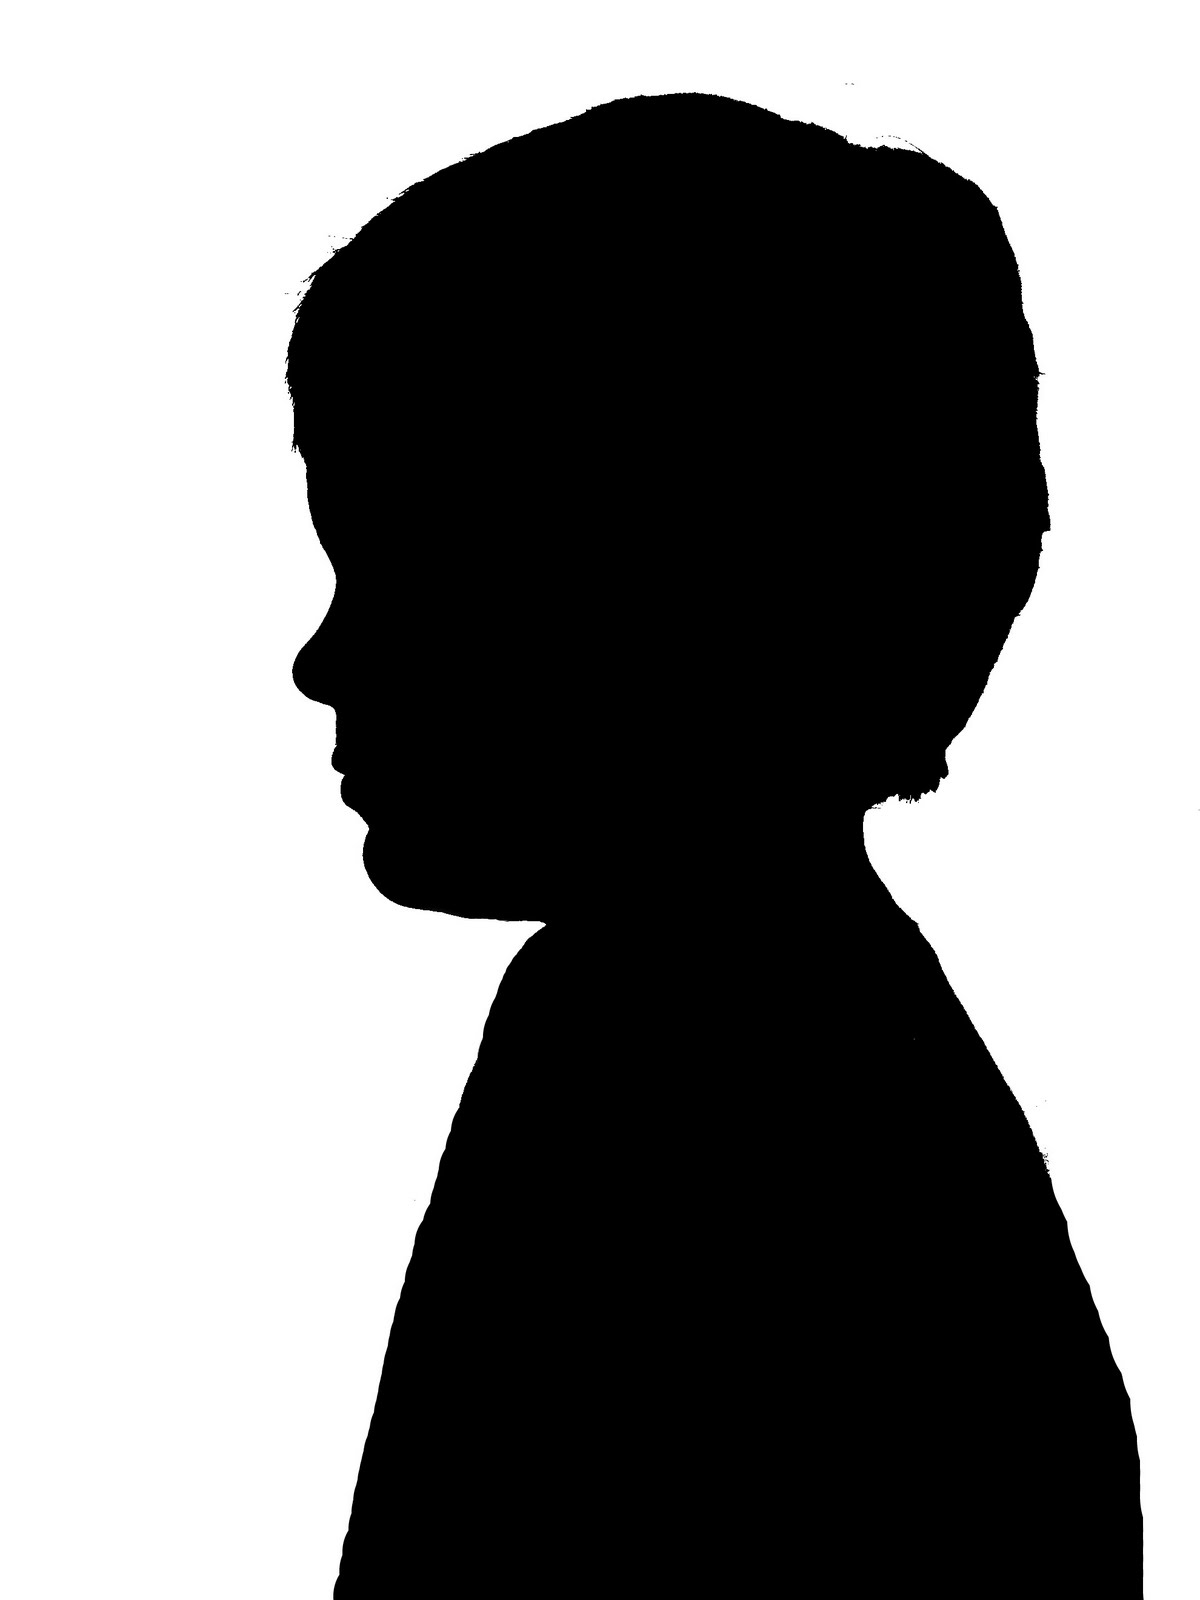 Side Profile Head Outline - ClipArt Best